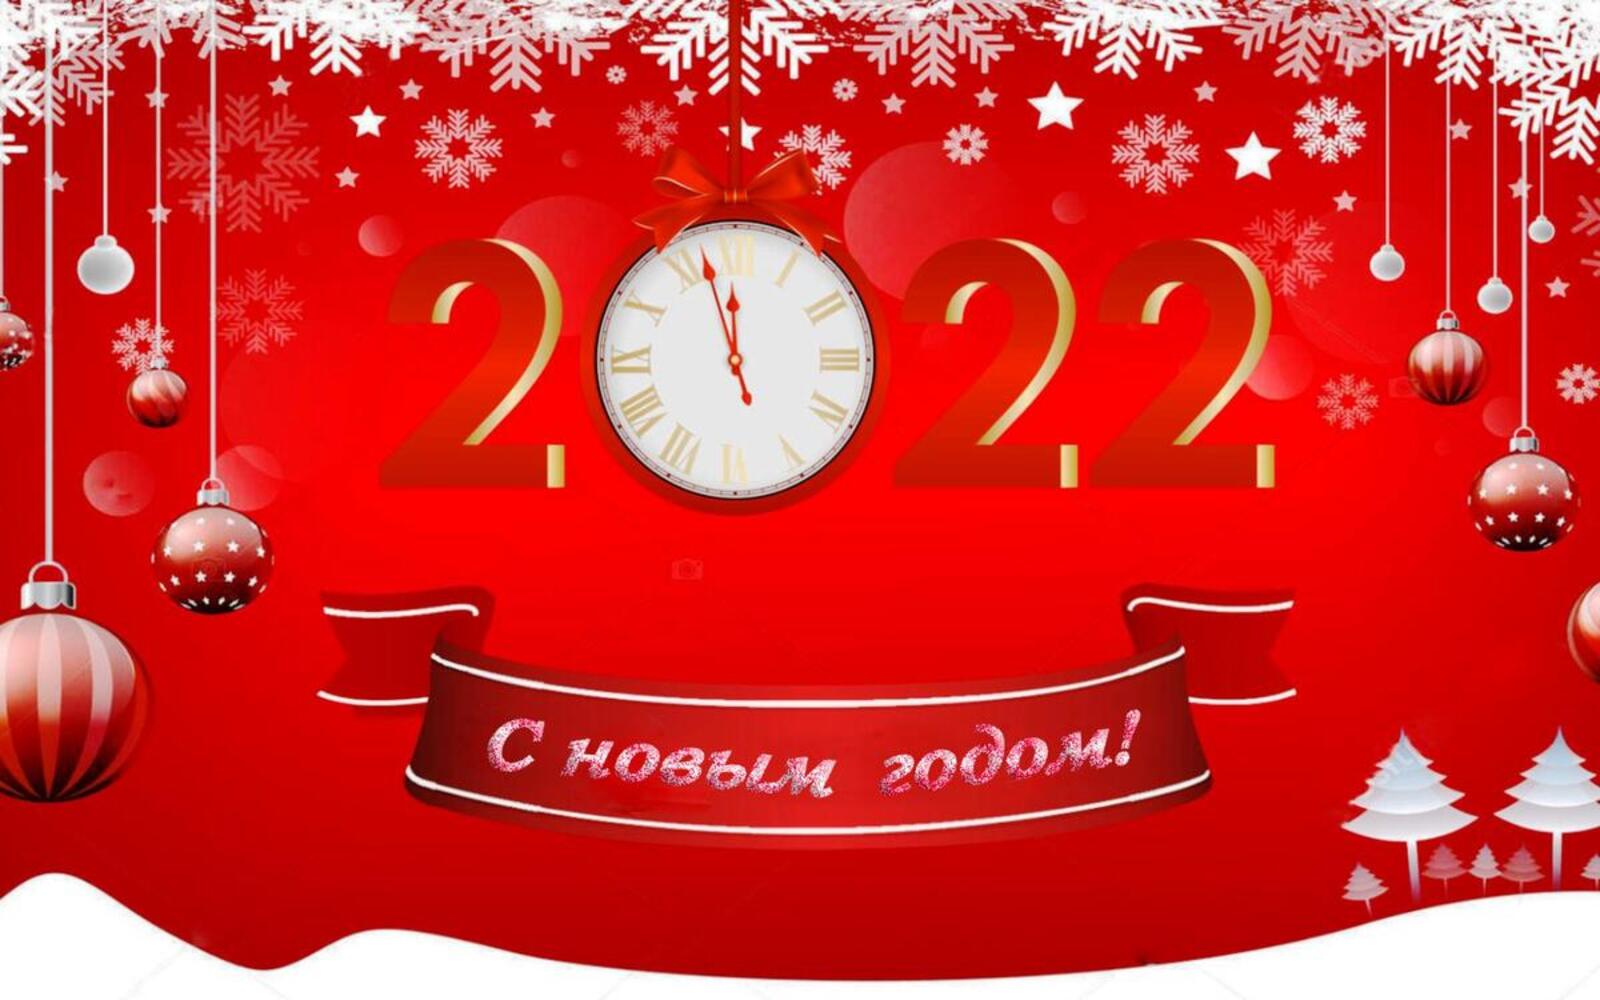 Wallpapers 2022 happy new year happy new year 2022 on the desktop